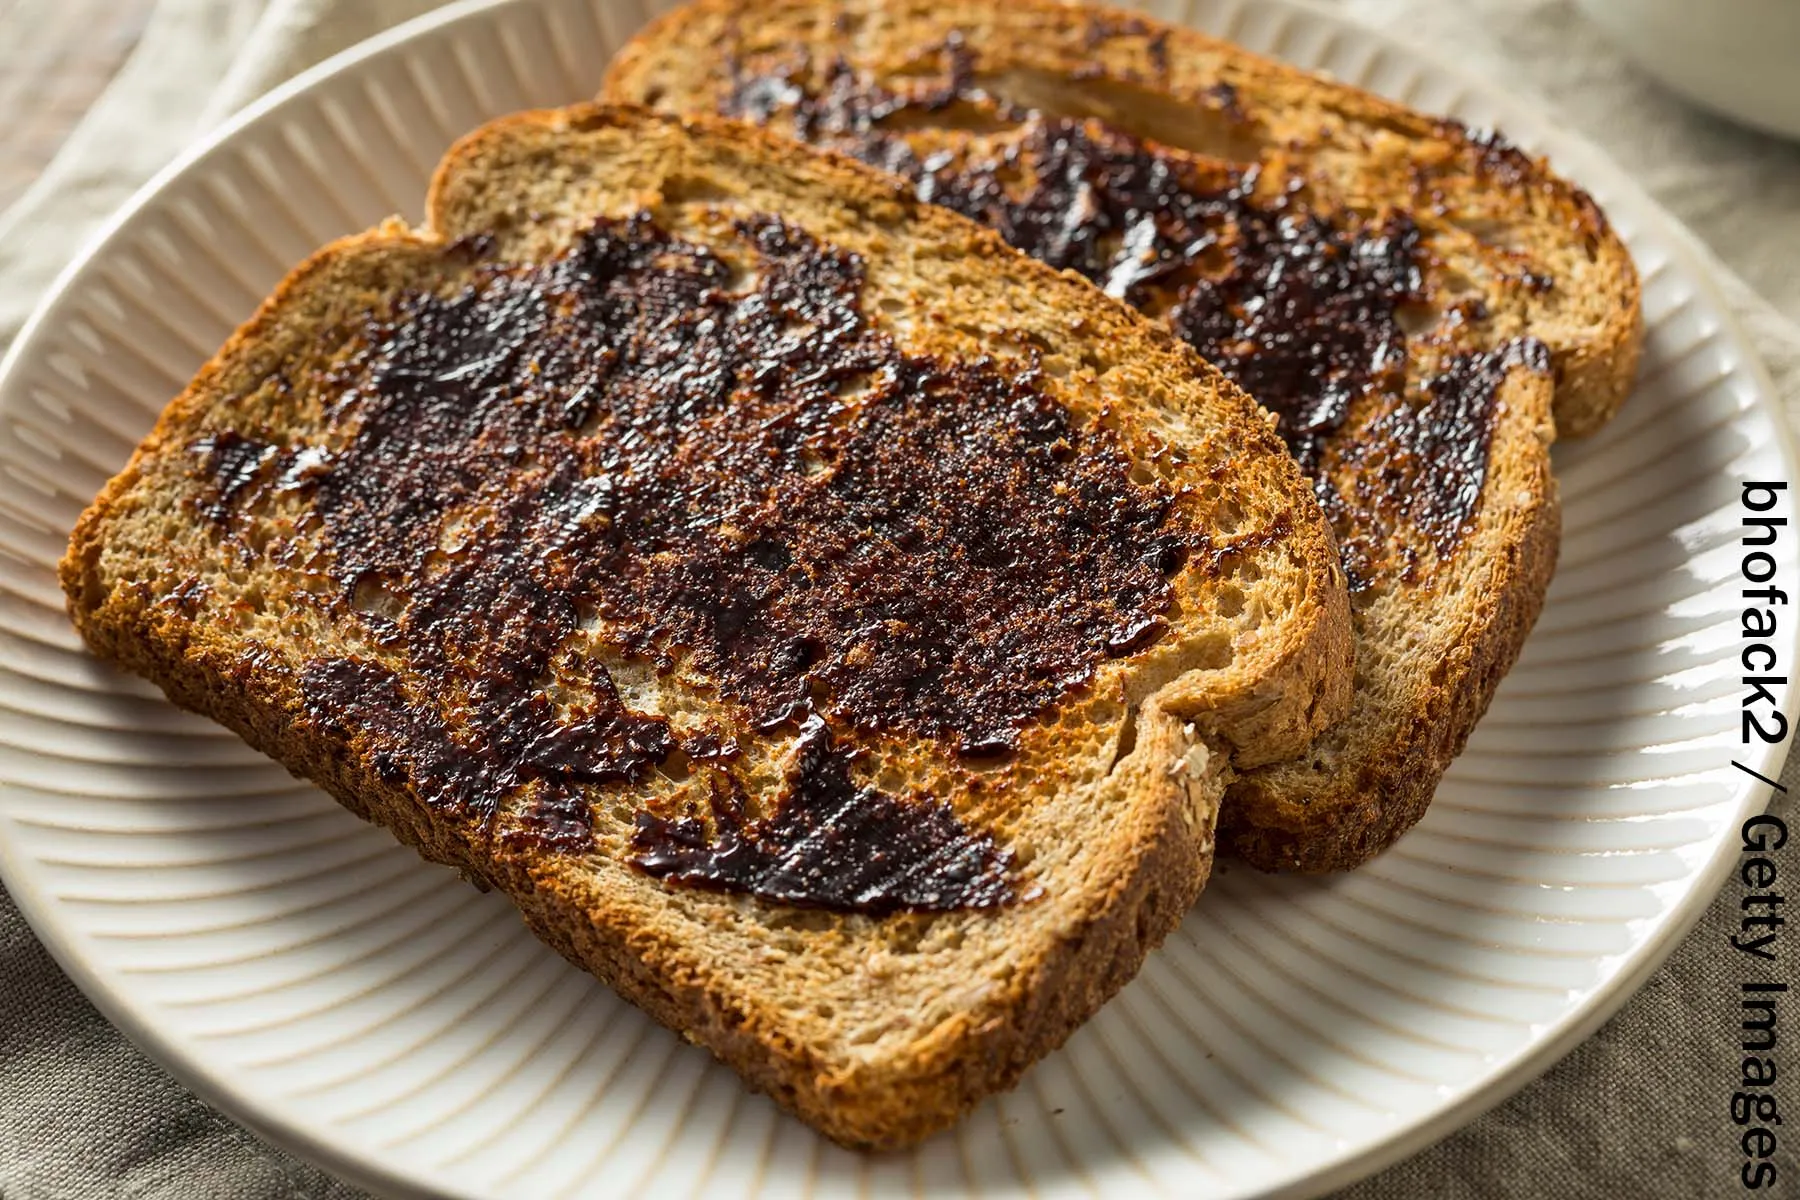 Marmite May Help With Anxiety, Study Finds